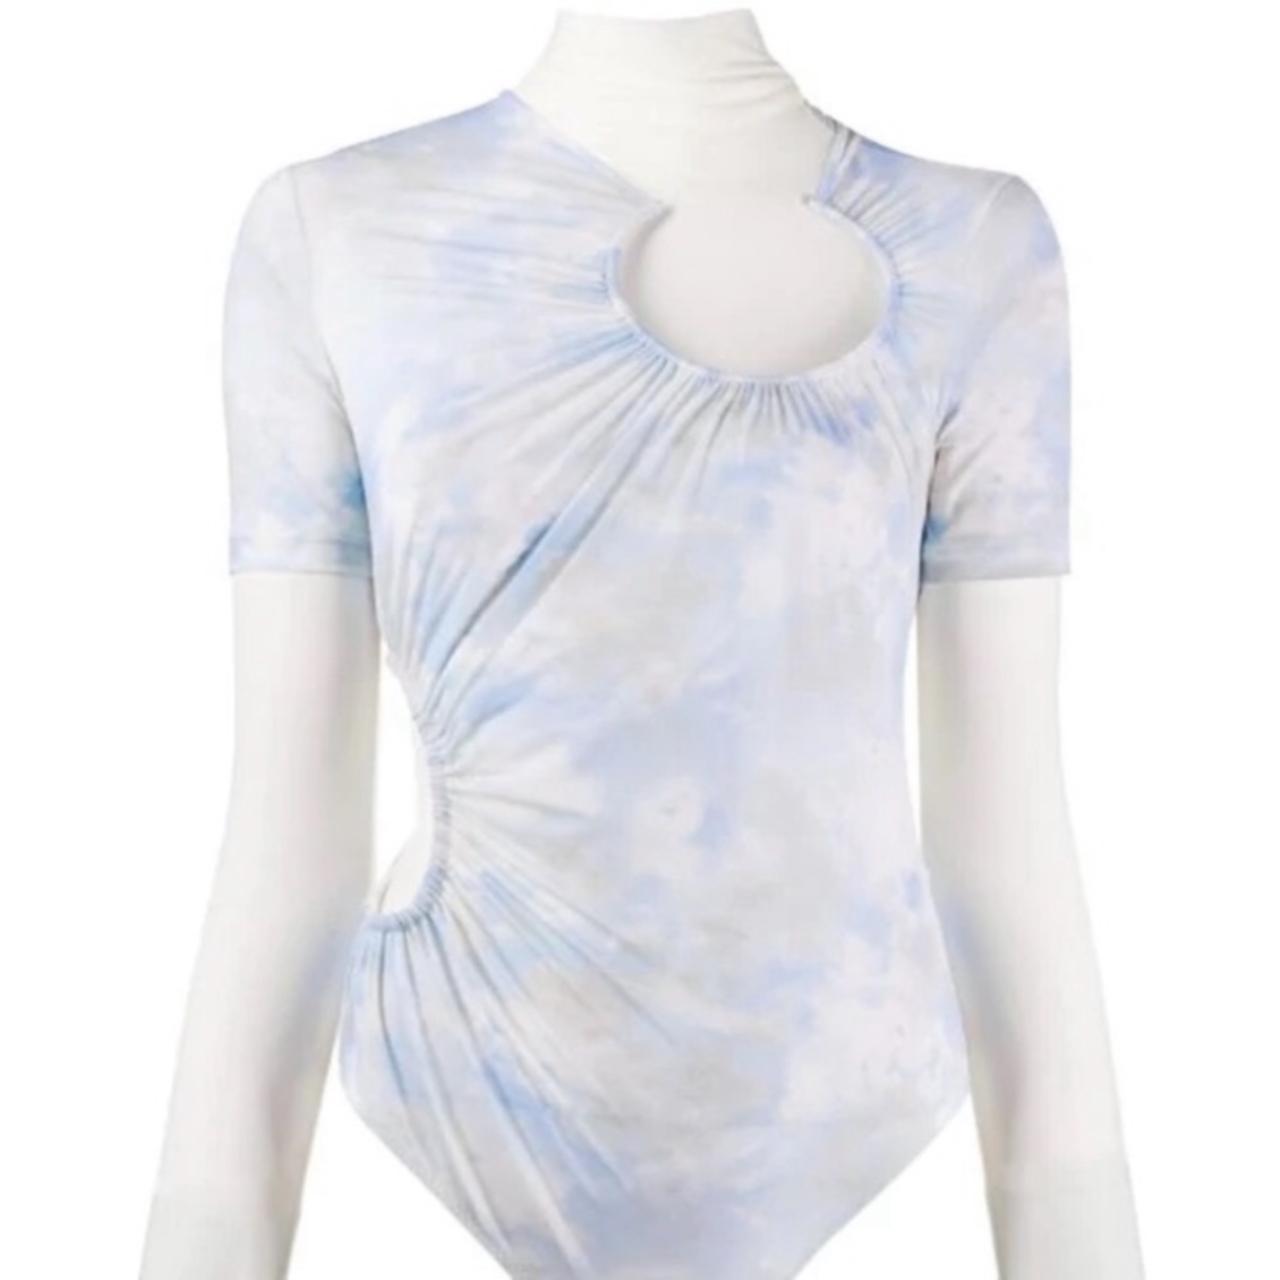 Product Image 1 - Off-White Cloud Tie-Dye Layered Bodysuit

Worn